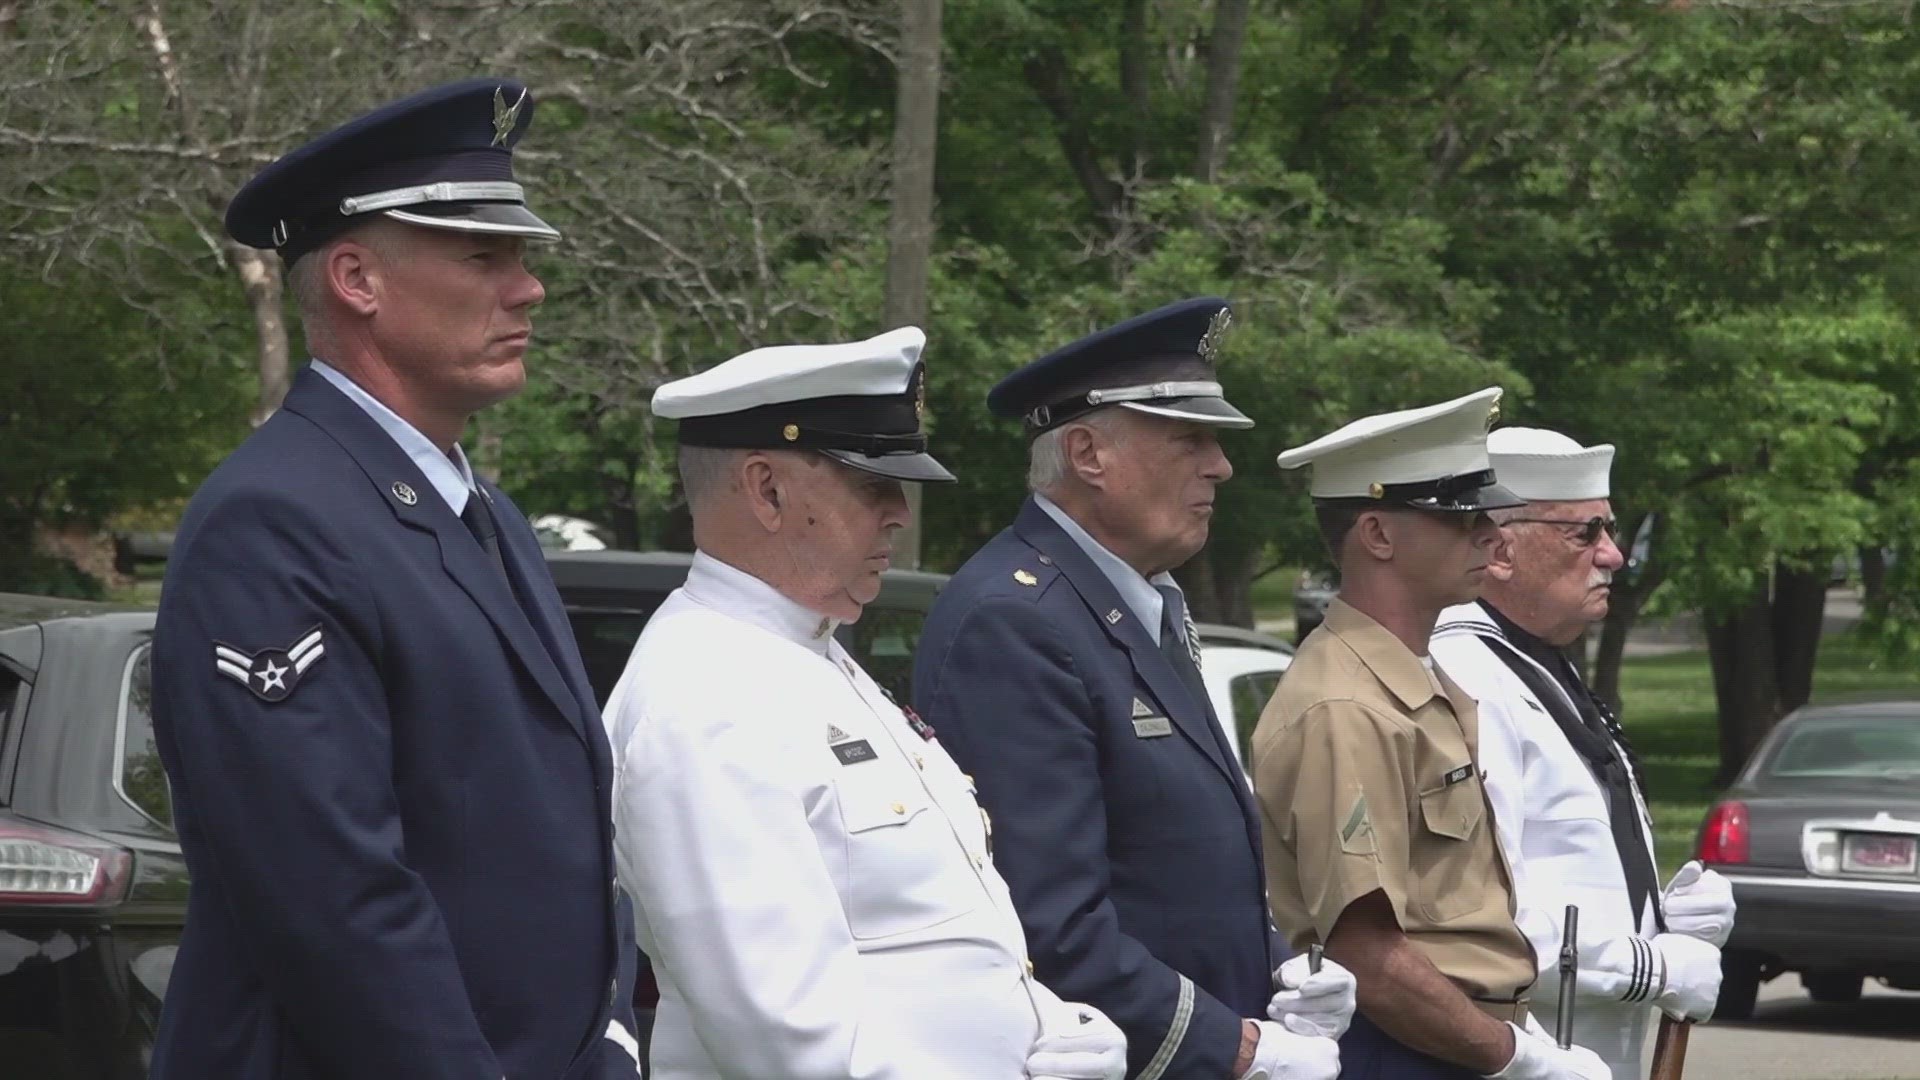 The annual event encourages community members to pause and remember America's fallen soldiers.